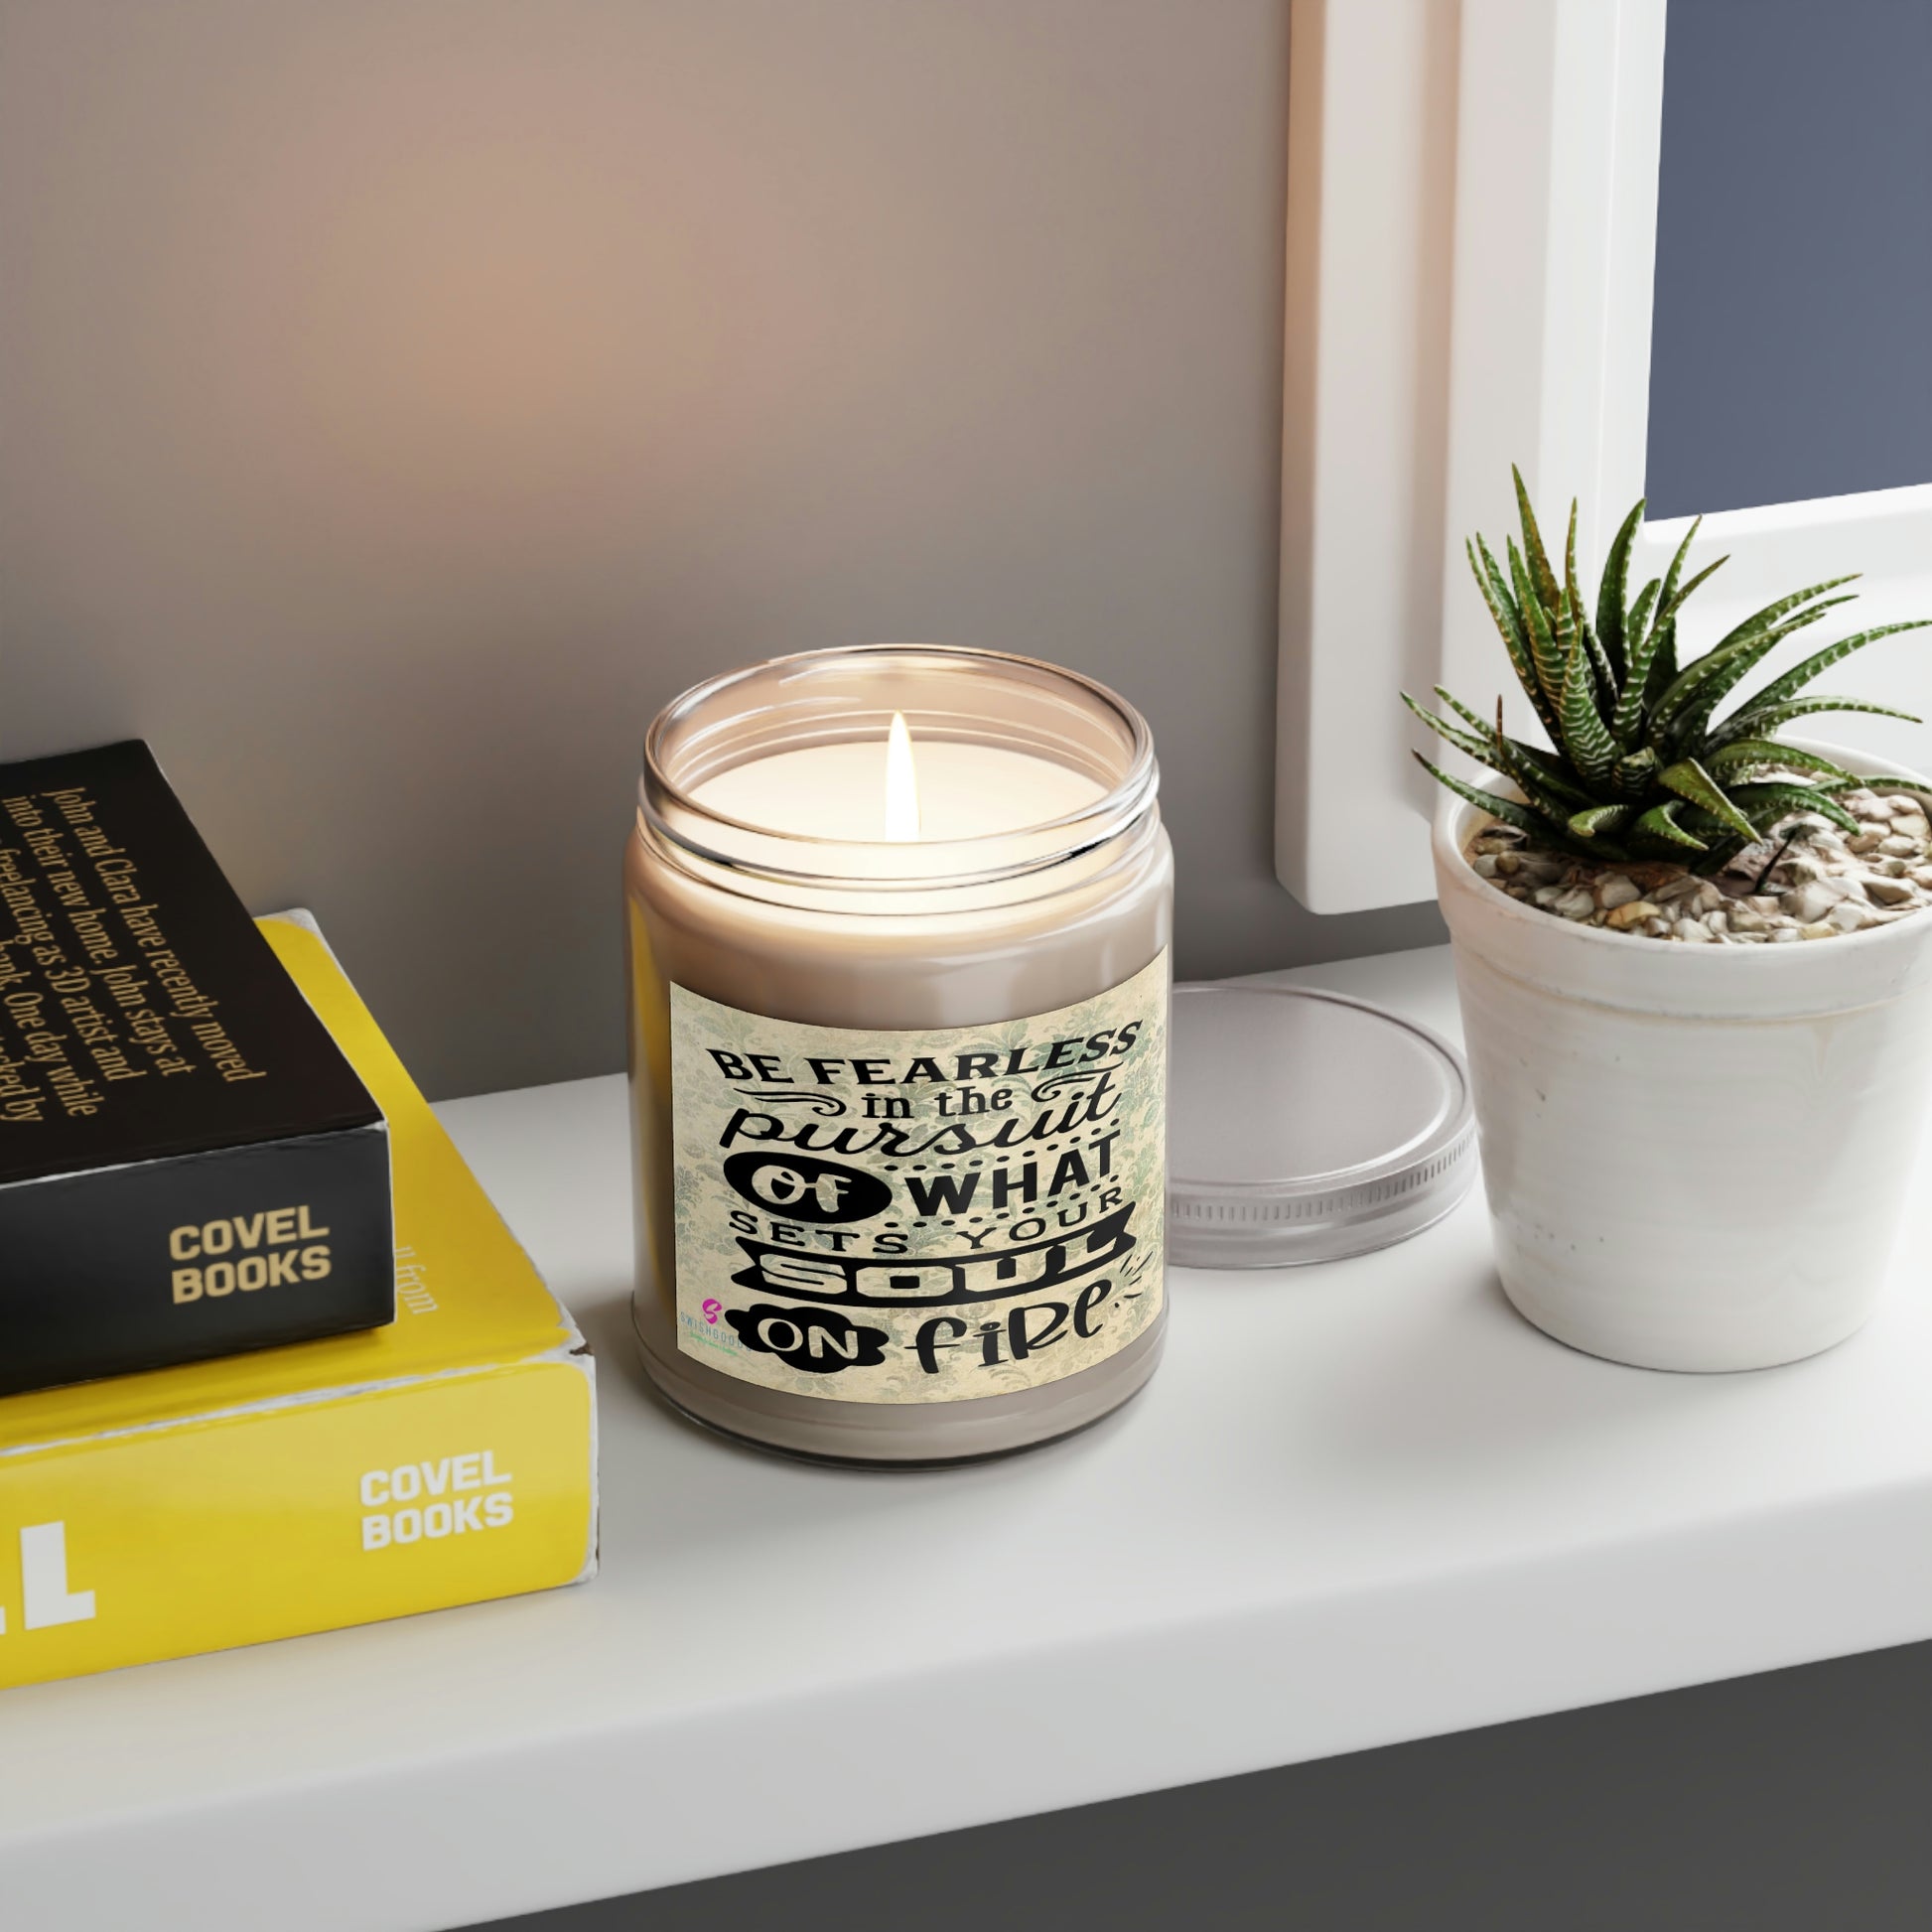 Soul on Fire Scented Candles - Swishgoods